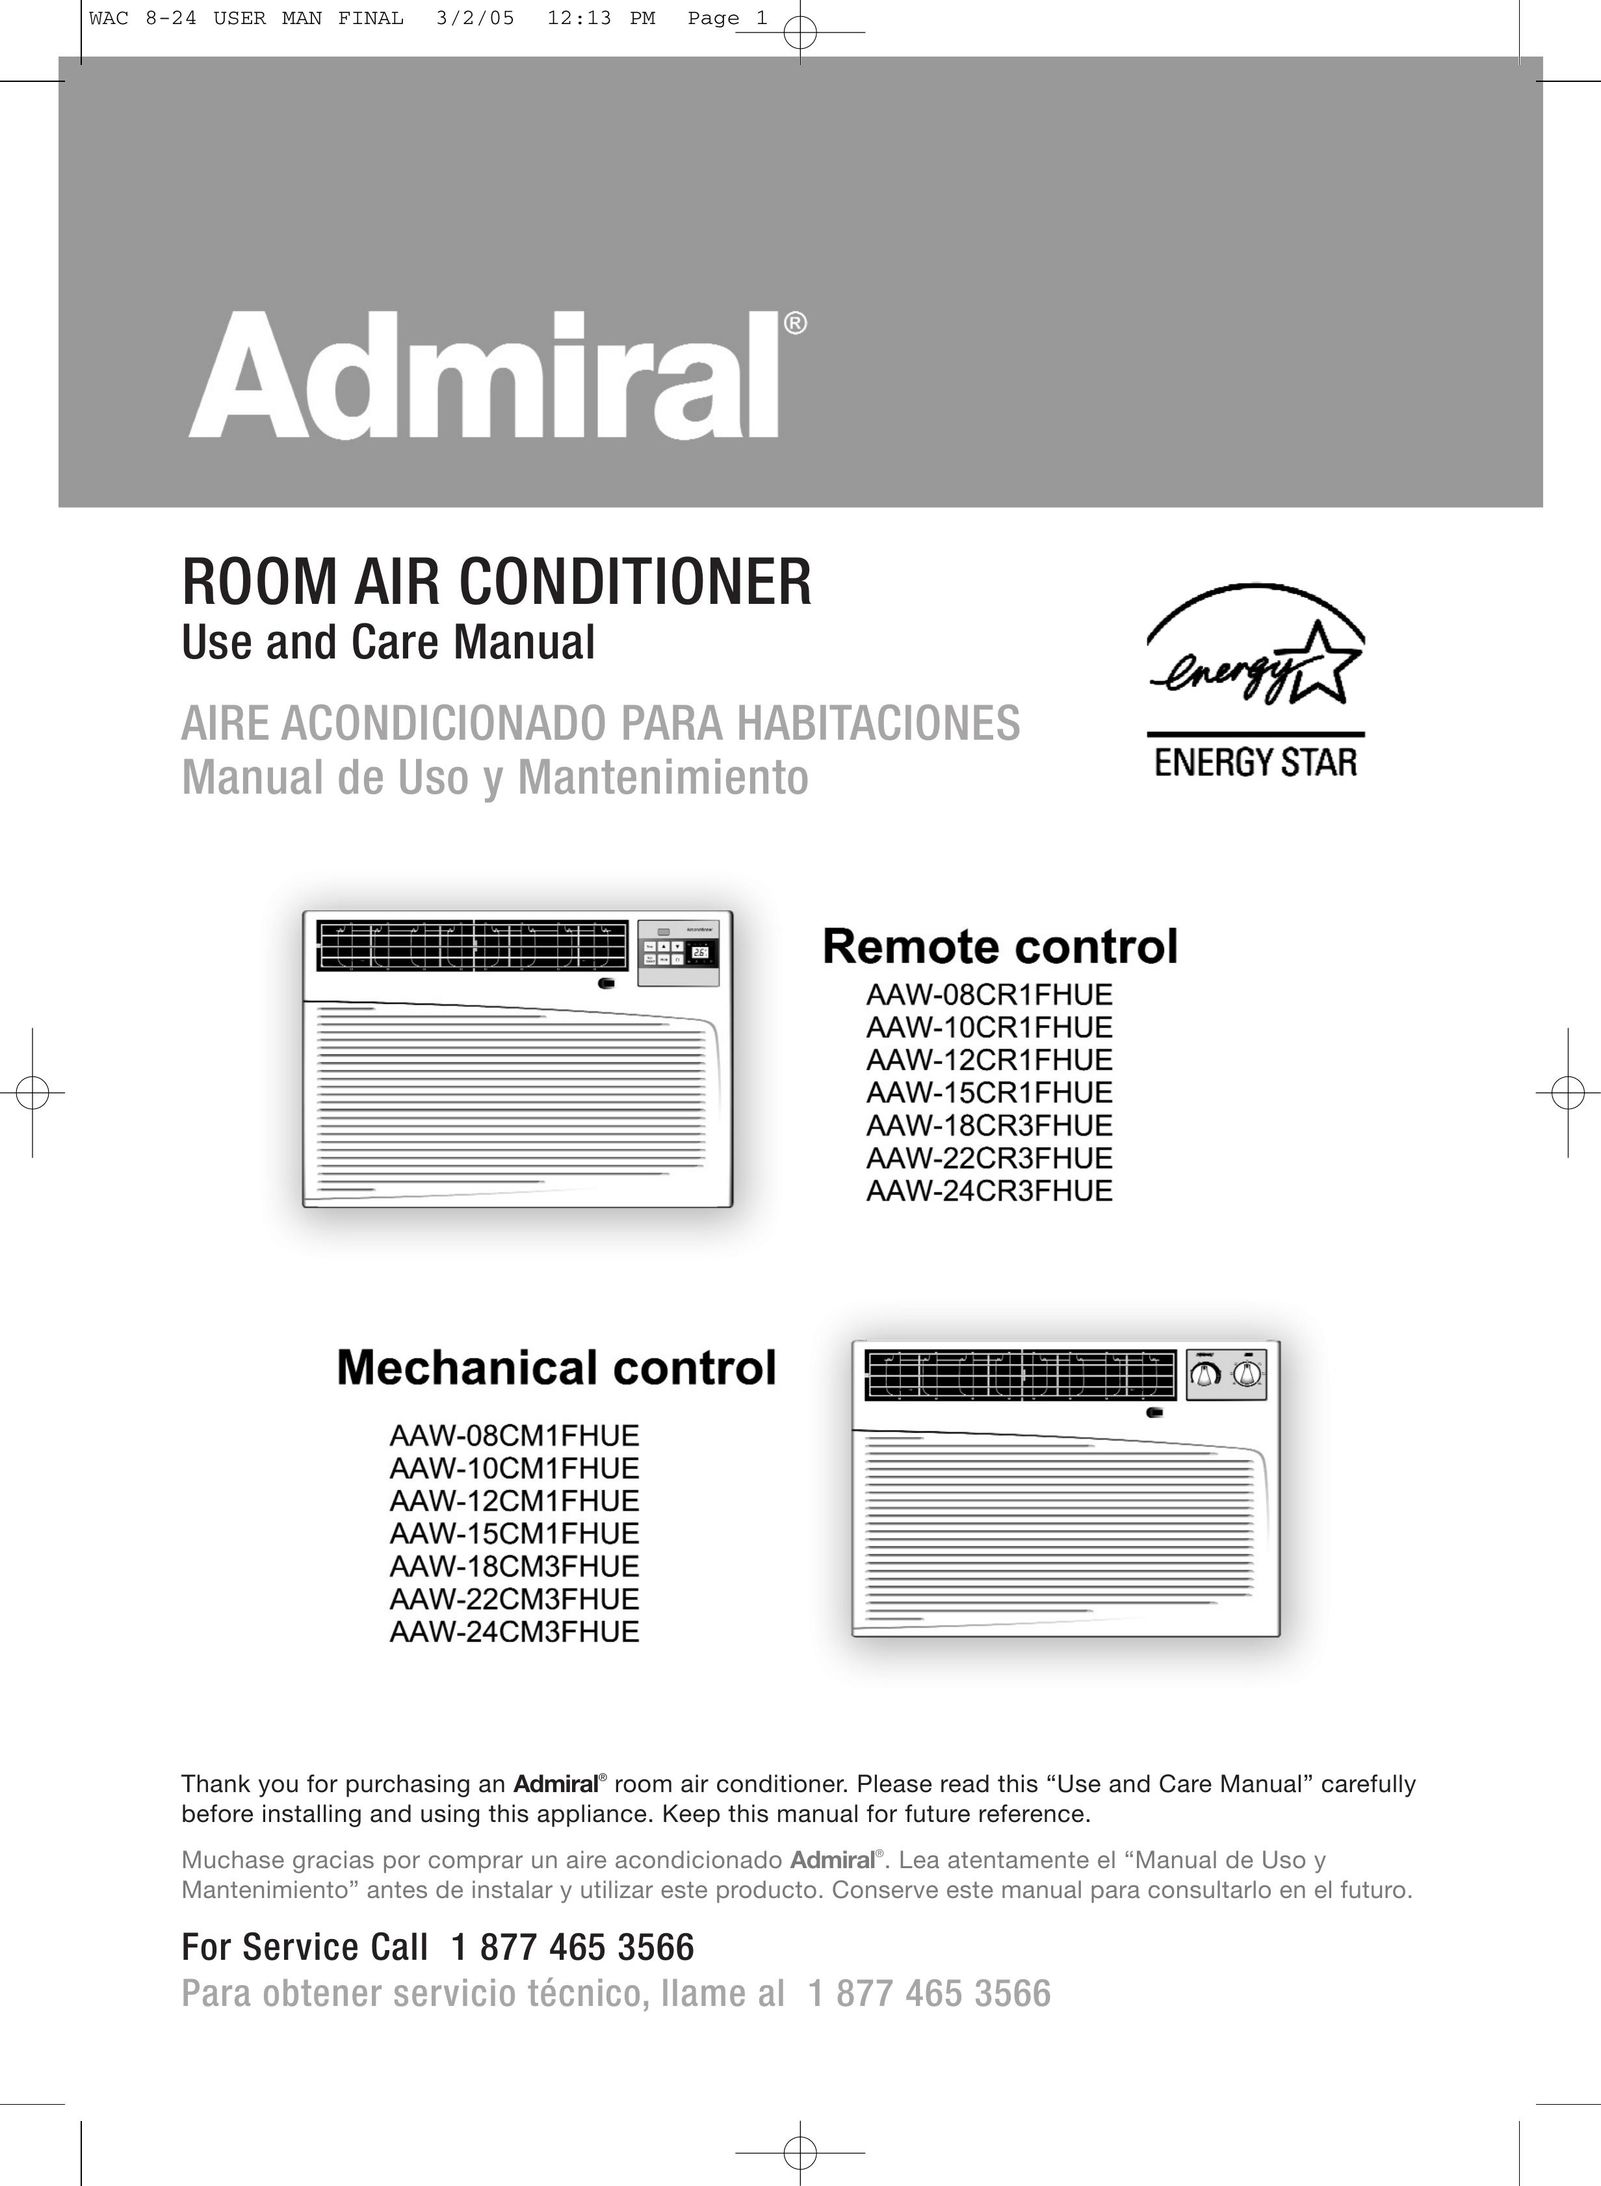 Admiral AAW-18CM1FHUE Air Conditioner User Manual